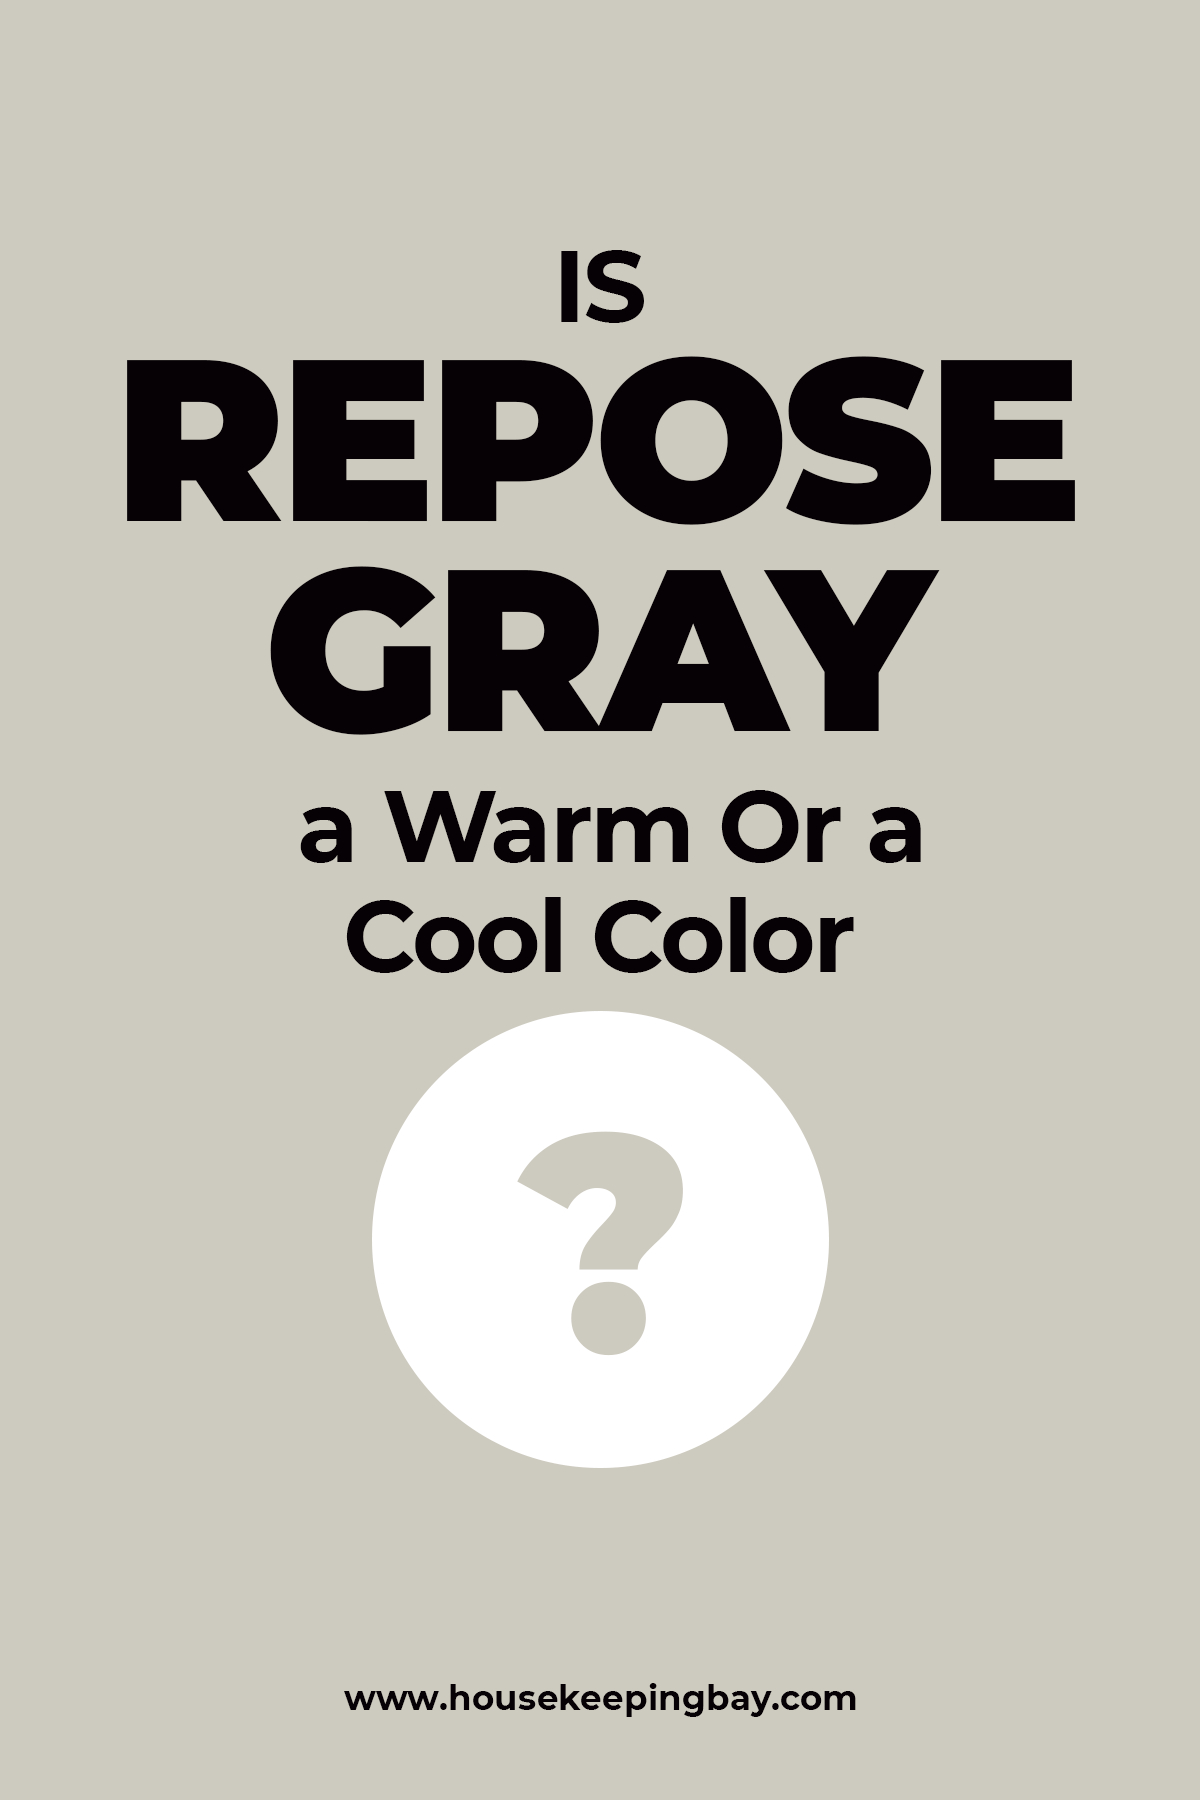 Is Repose Gray a Warm Or a Cool Color